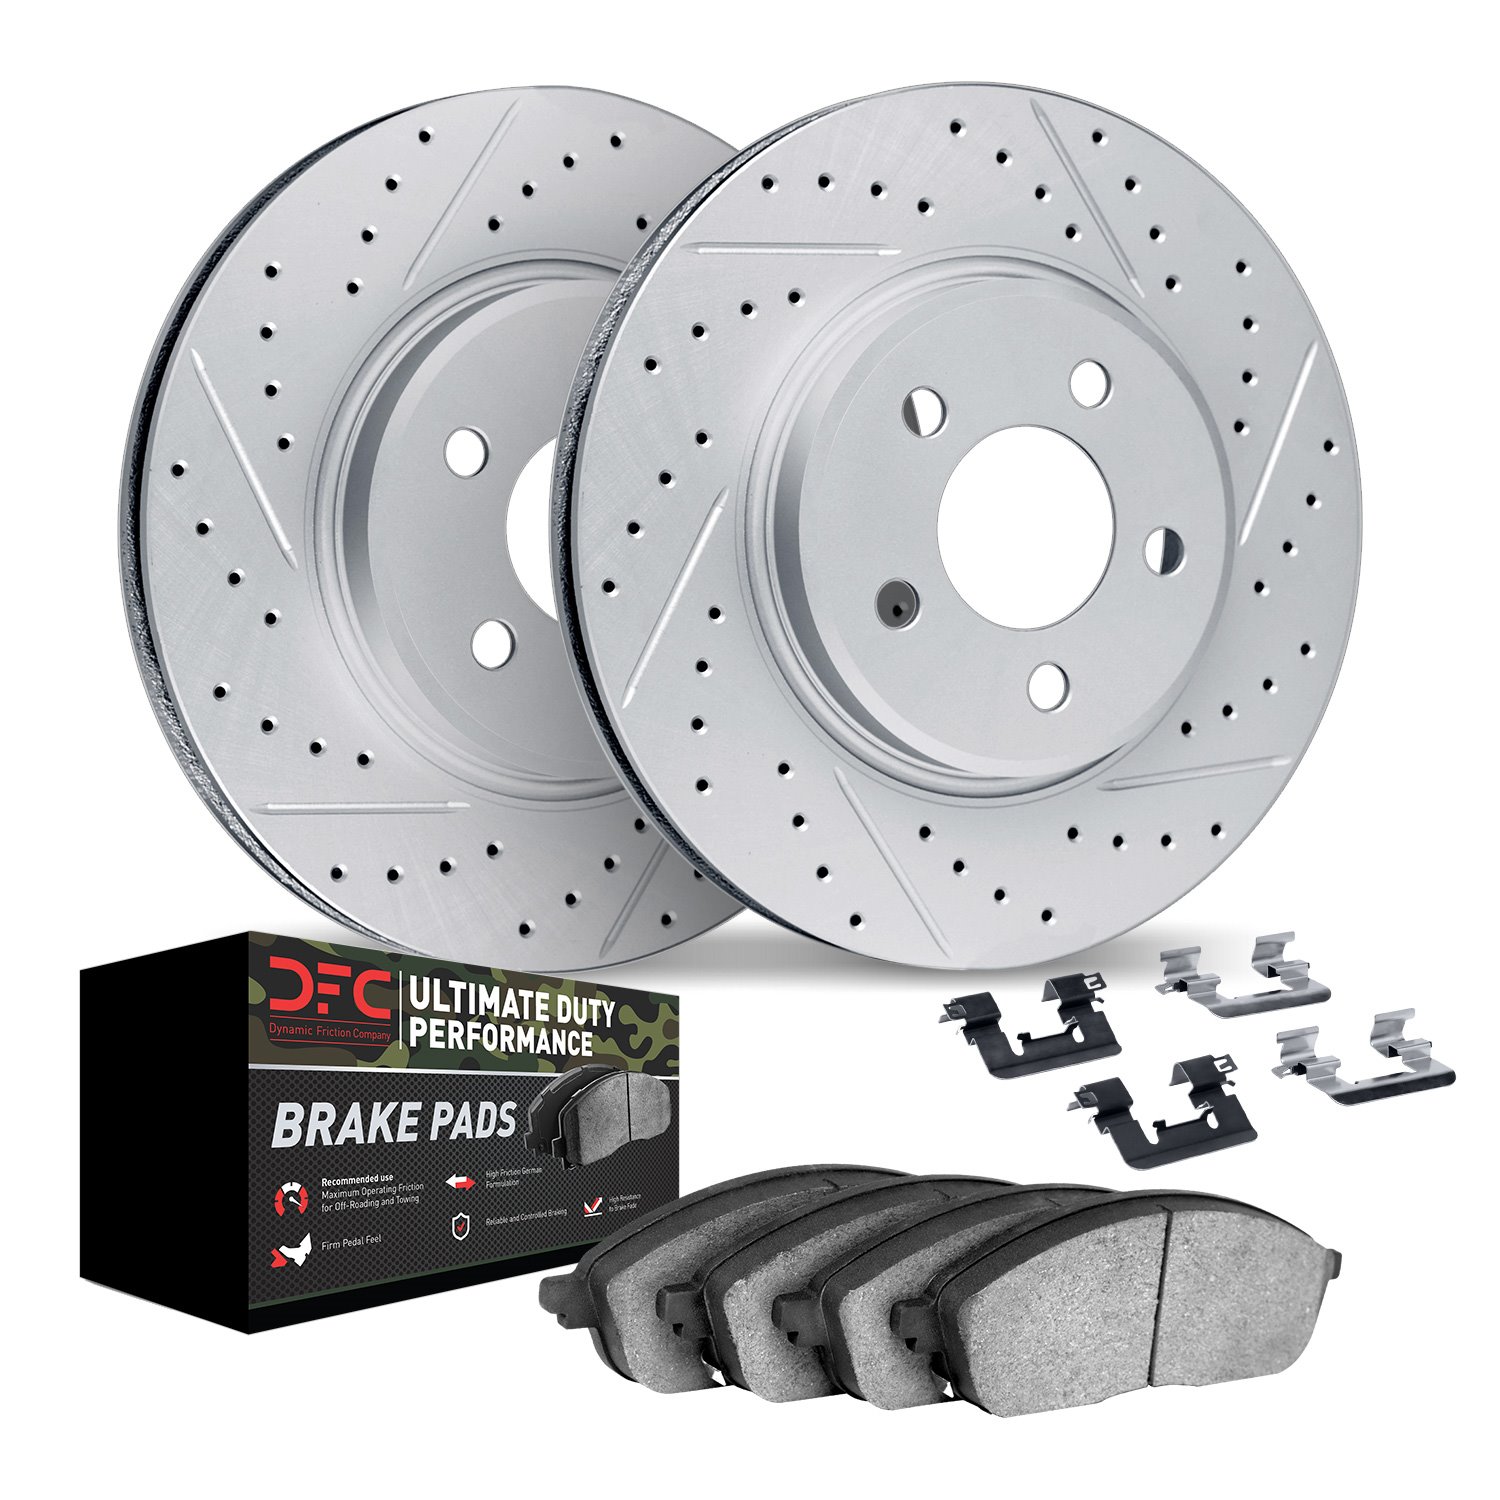 2412-54027 Geoperformance Drilled/Slotted Brake Rotors with Ultimate-Duty Brake Pads Kit & Hardware, 1998-2002 Ford/Lincoln/Merc